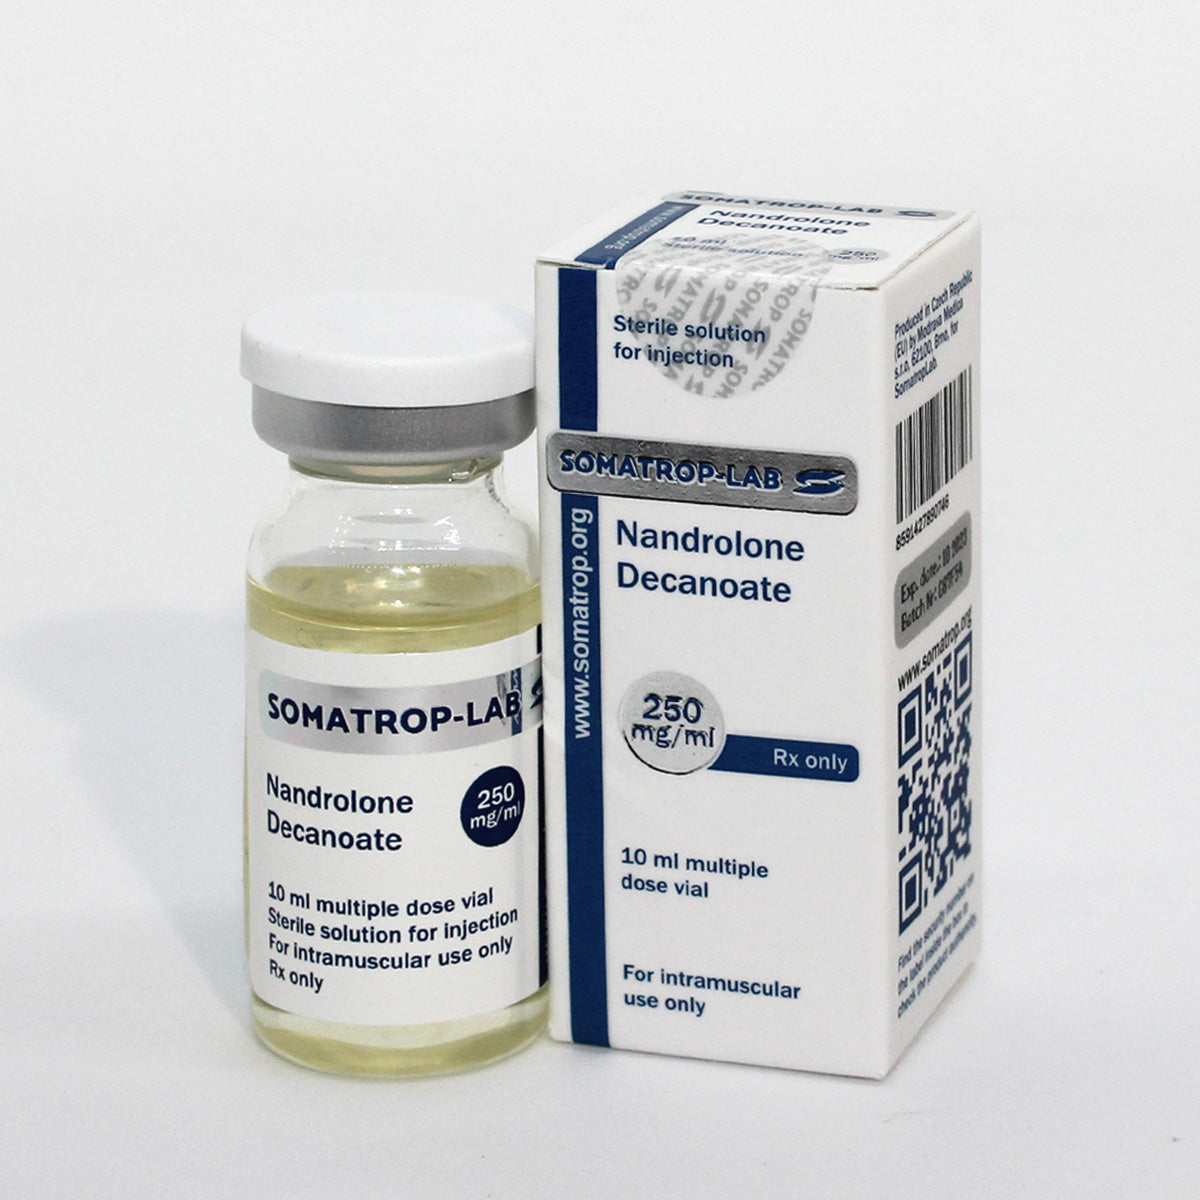 Somatrop-Lab Nandrolone Decanoate 10ml/250mg/ml front packaging.